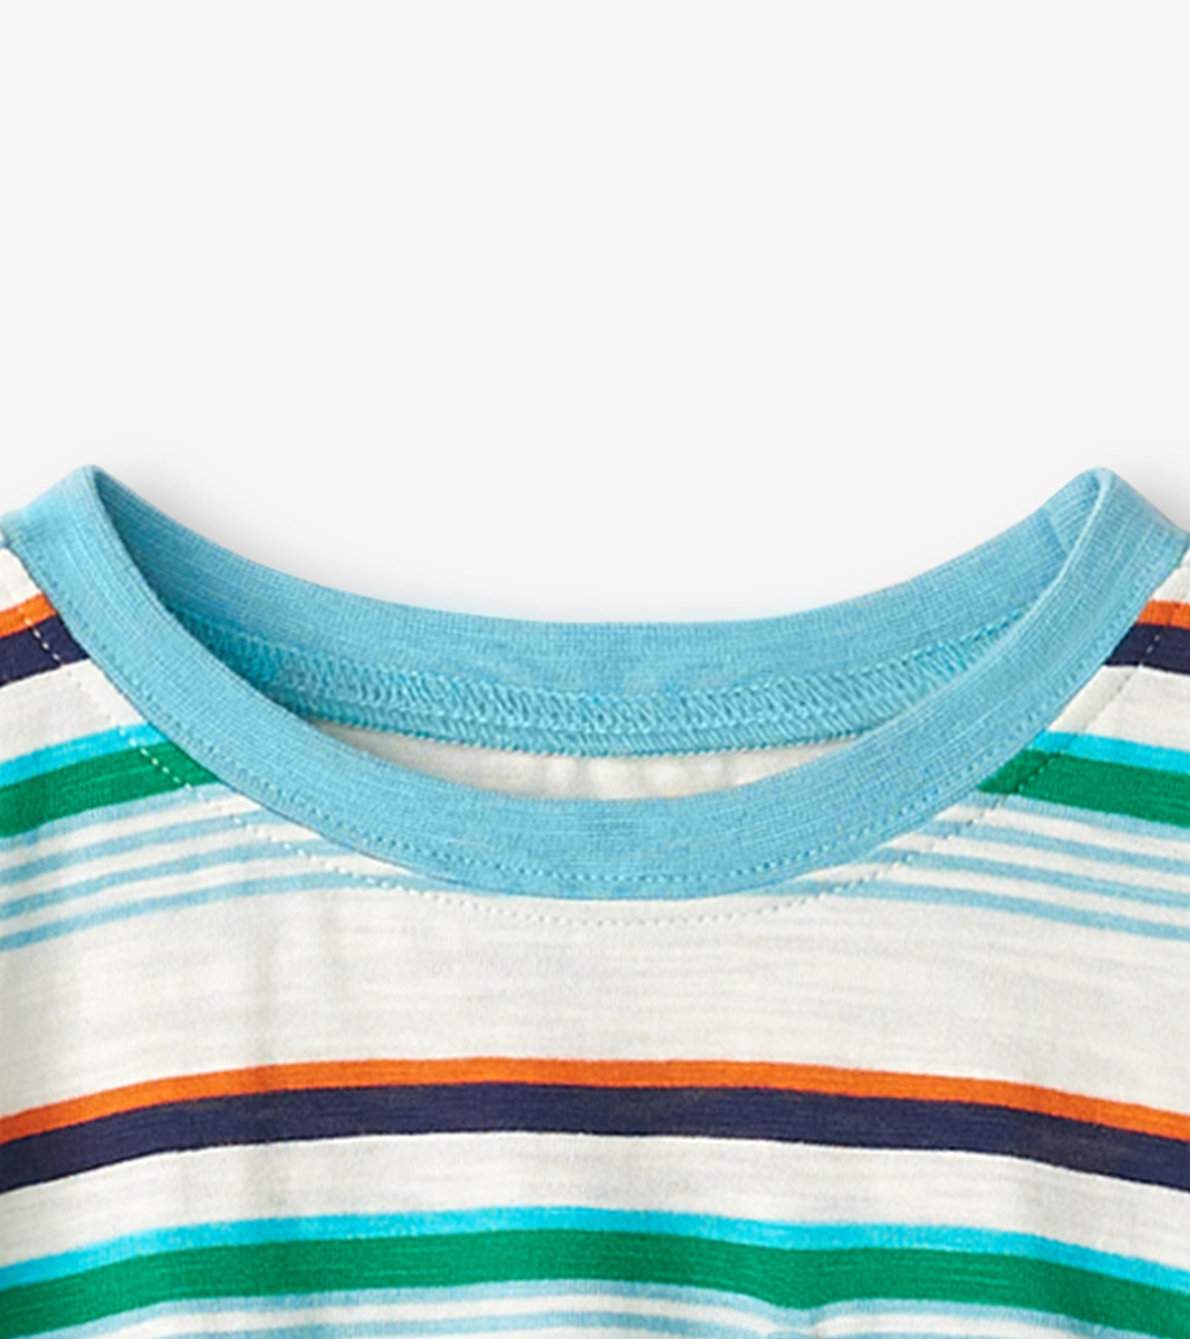 View larger image of Boys Hiking Stripes Pocket Tee